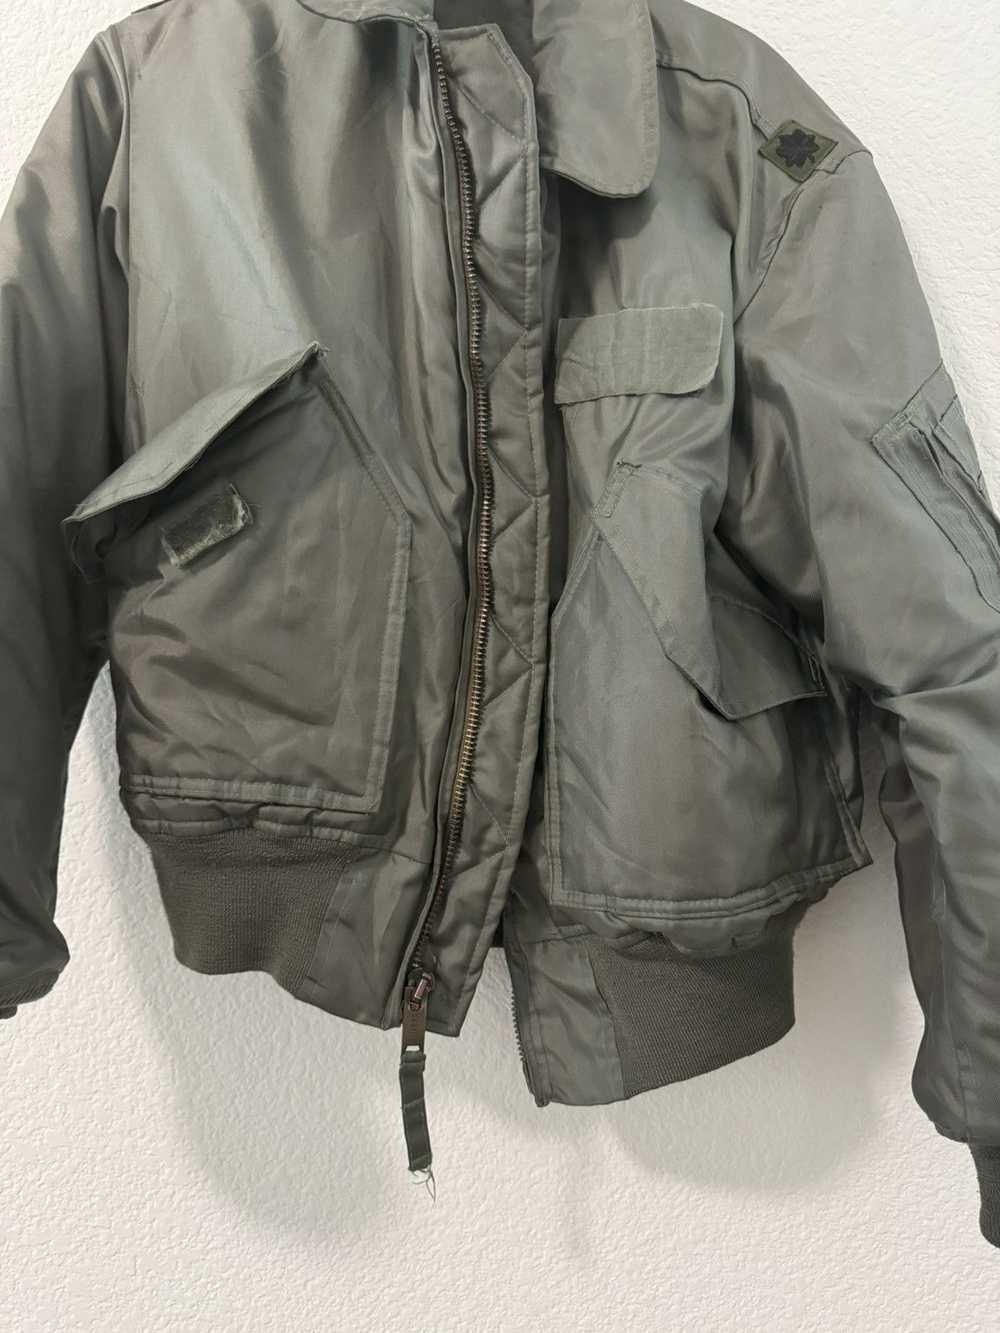 Vintage Vintage bomber jacket from the 50s - image 2